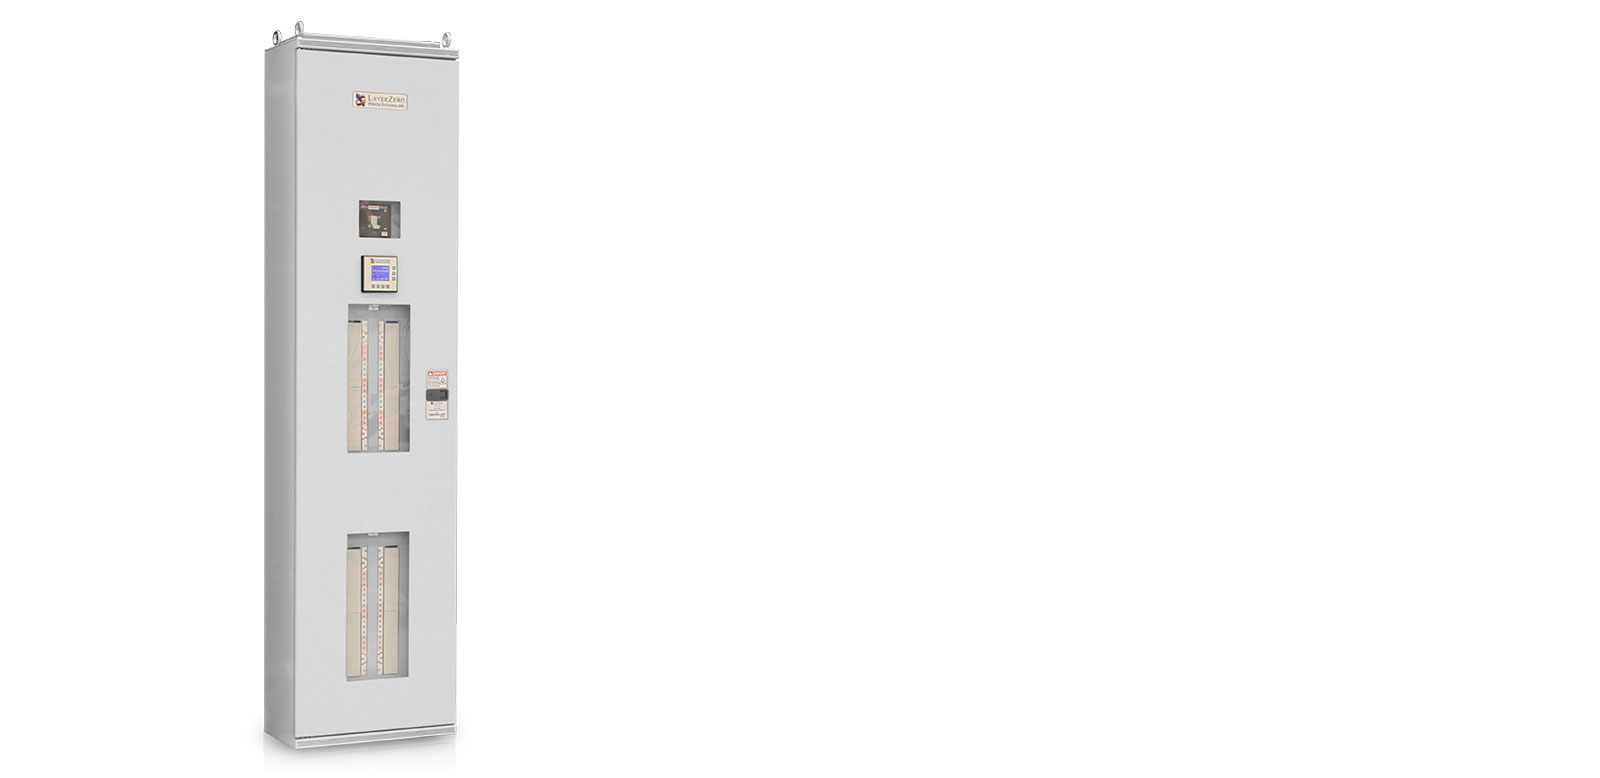 Series 70: eRPP-SL2 High-Density Wall-Mounted Remote Power Panel